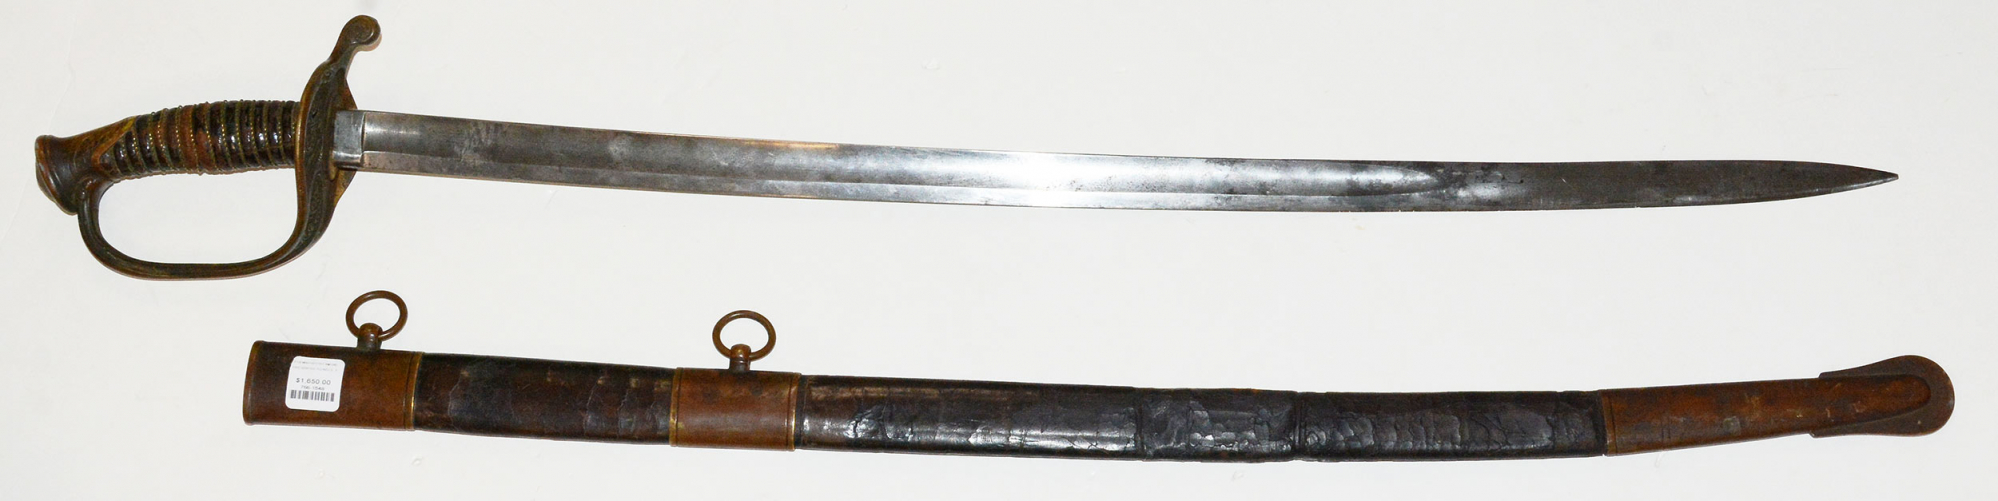 VERY EARLY WAR PRESENTATION FOOT OFFICER’S SWORD BY ENOCH Q. FELLOWS, ADJUTANT 1st NEW HAMPSHIRE